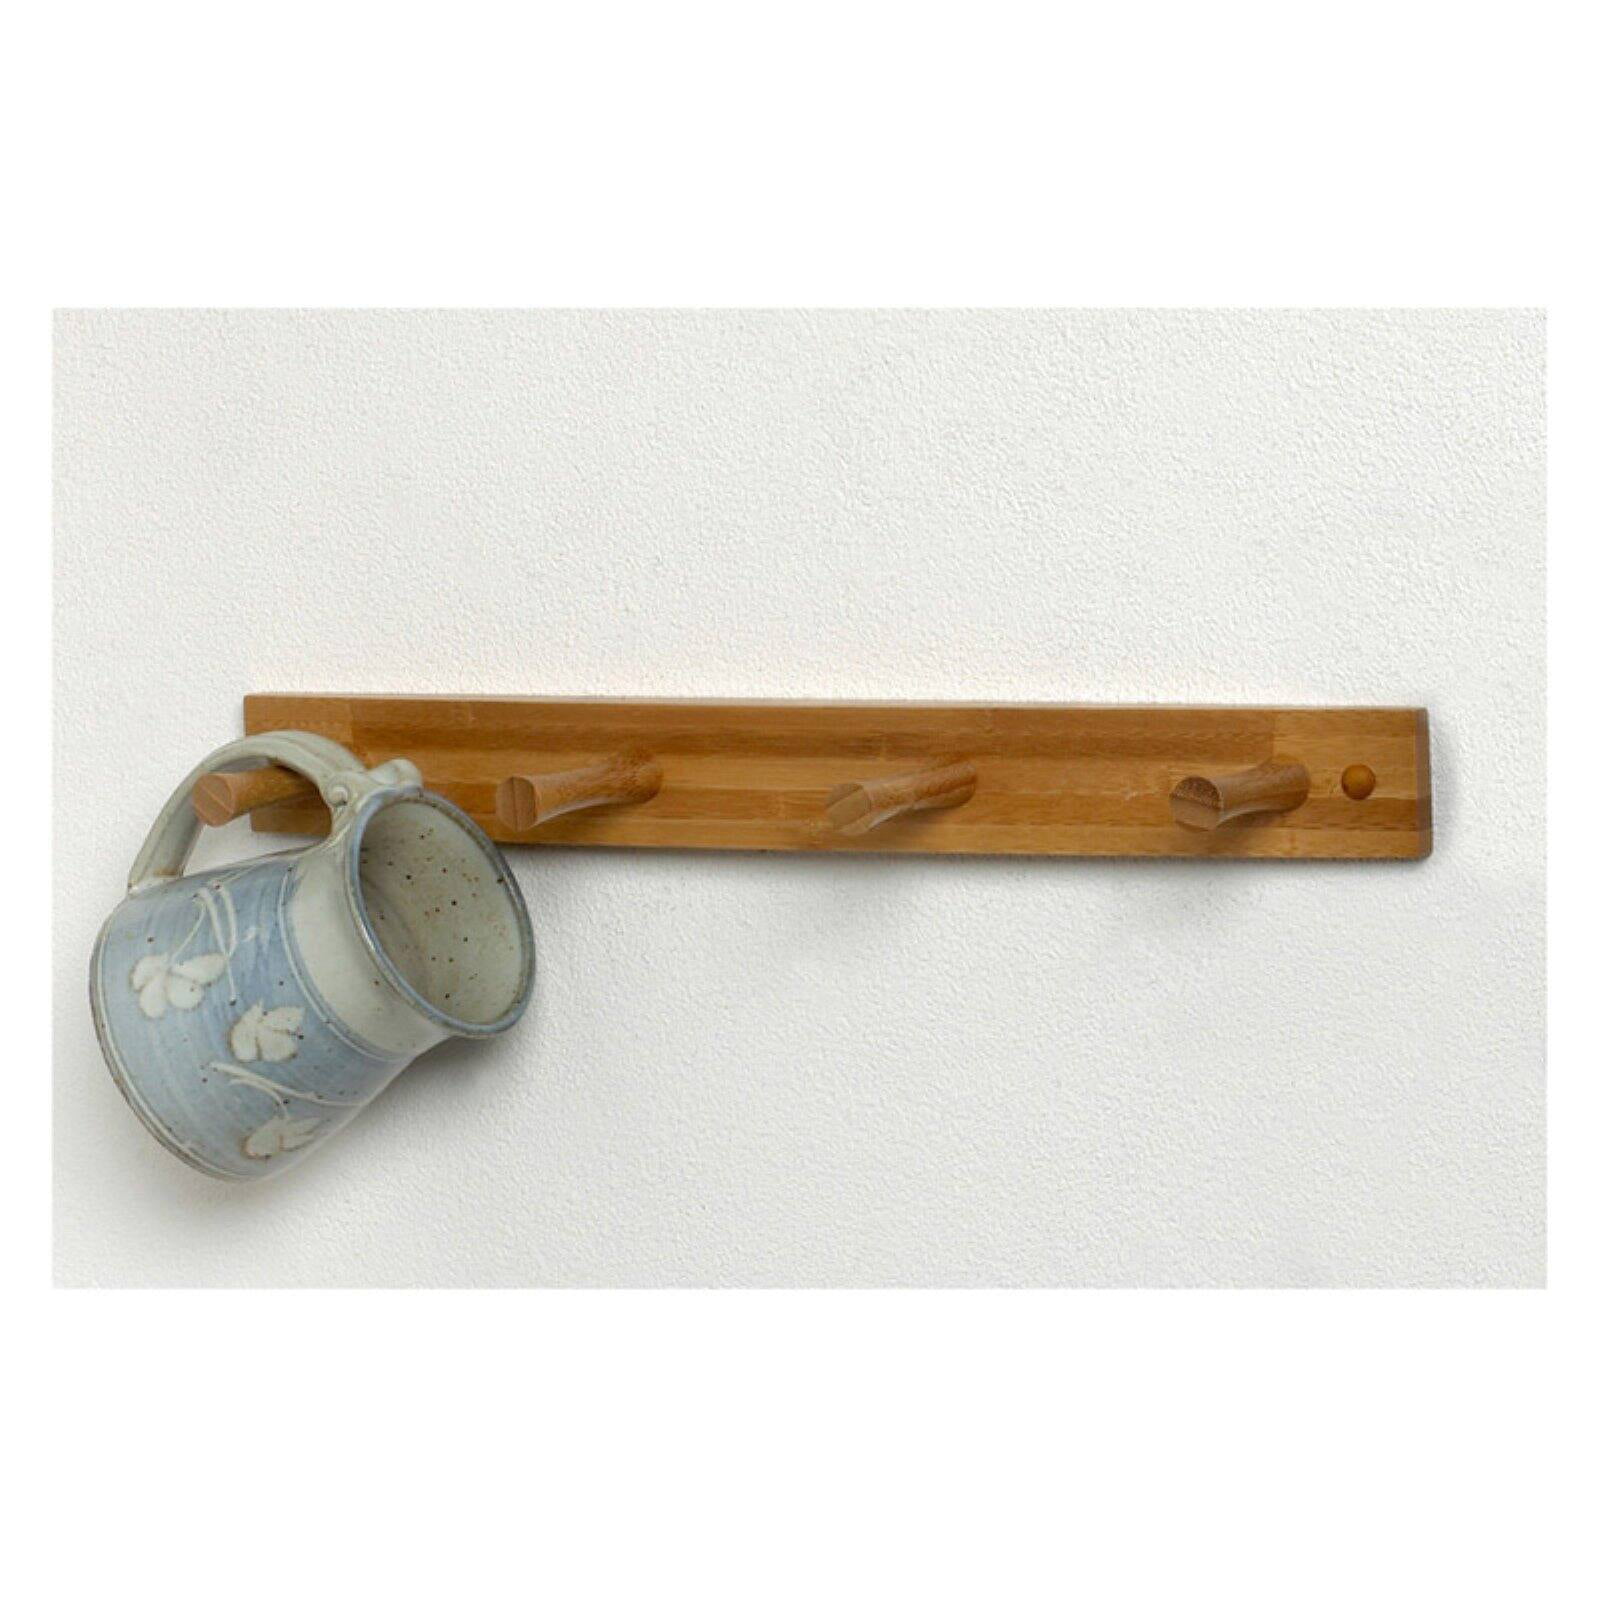 ANZOME Natural Wooden Coat Hook Wooden Coat Hanger Coat Pegs for Hanging Coats Hat Living room Hallway 4 Pieces Wood Wall Hook Clothes and Headset in Bedroom Scarf